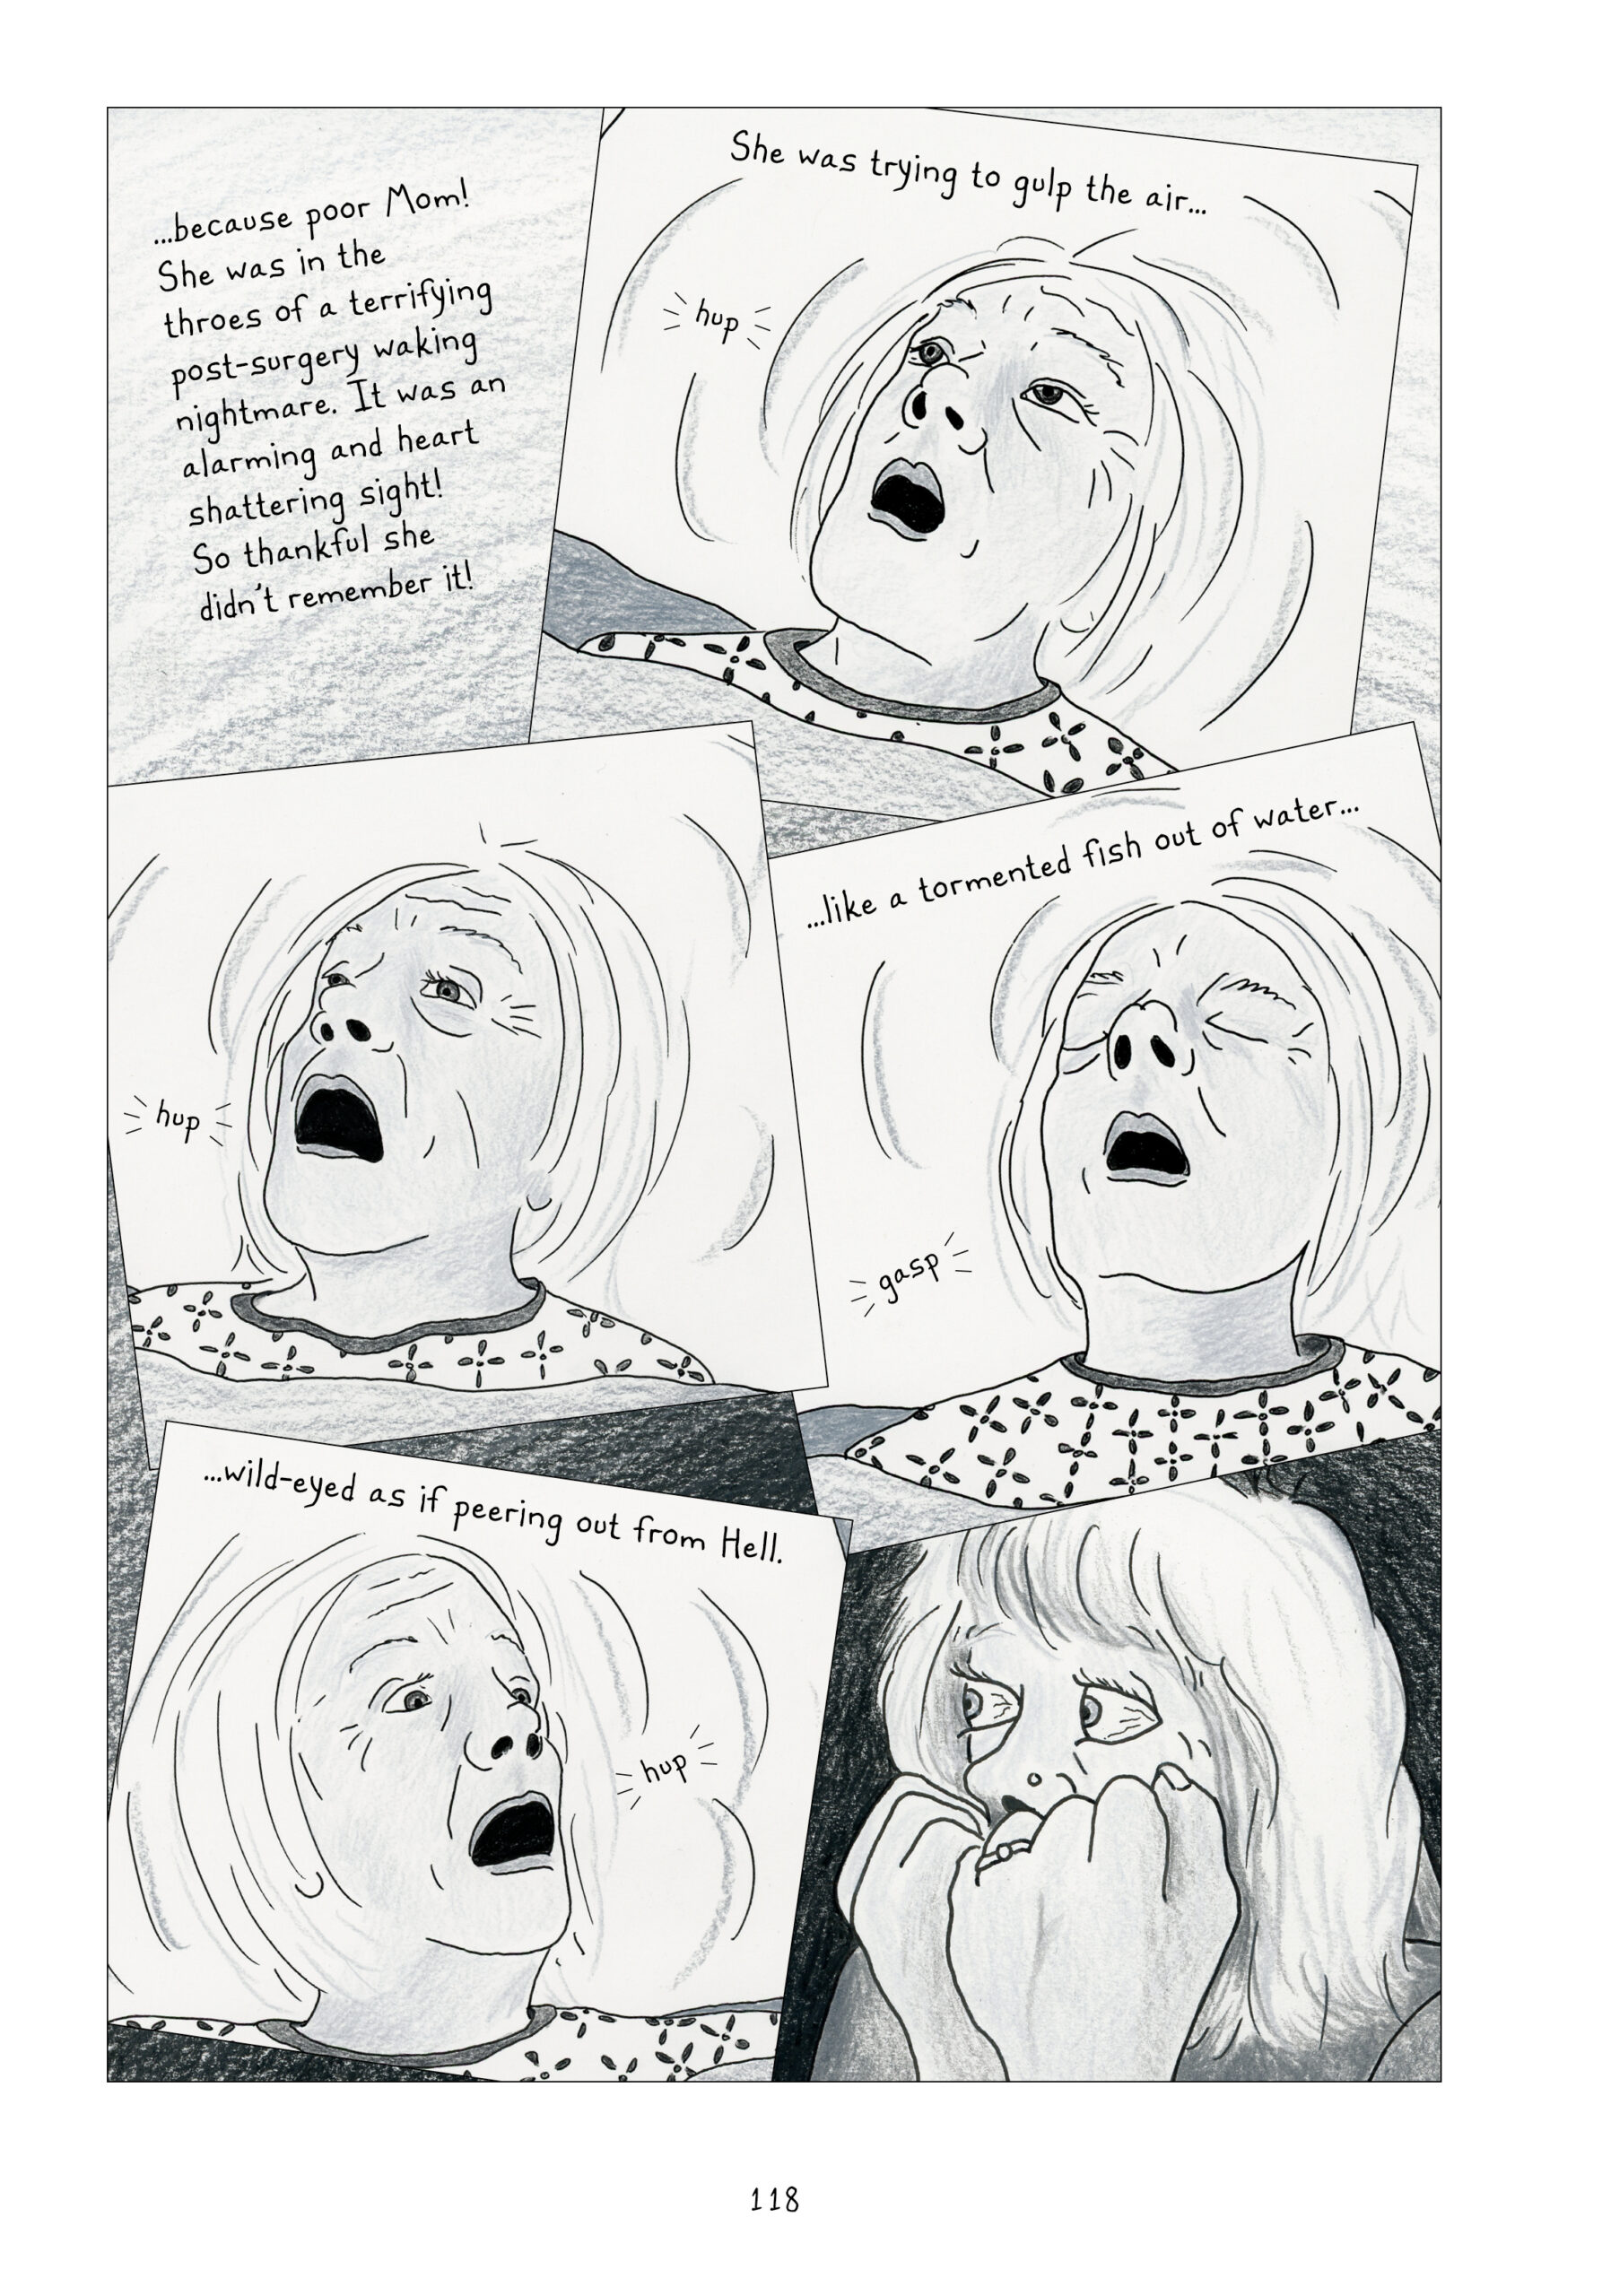 Lynn continues, â€œâ€¦because poor Mom! She was in the throes of a terrifying post-surgery waking nightmare. It was an alarming and heart shattering sight! So thankful she didnâ€™t remember it! She was trying to gulp the airâ€¦like a tormented fish out of waterâ€¦wild-eyed as if peering out from Hell.â€ Four panels of Lorraine gulping for airâ€”â€œhup, hup, gasp, hupâ€â€”cascade down the page. She looks tired and becomes increasingly panicked, eyes wide. Lynn looks on from the side with her eyes cartoonishly bulging out of their sockets, covering her face with her hands as she watches in horror.